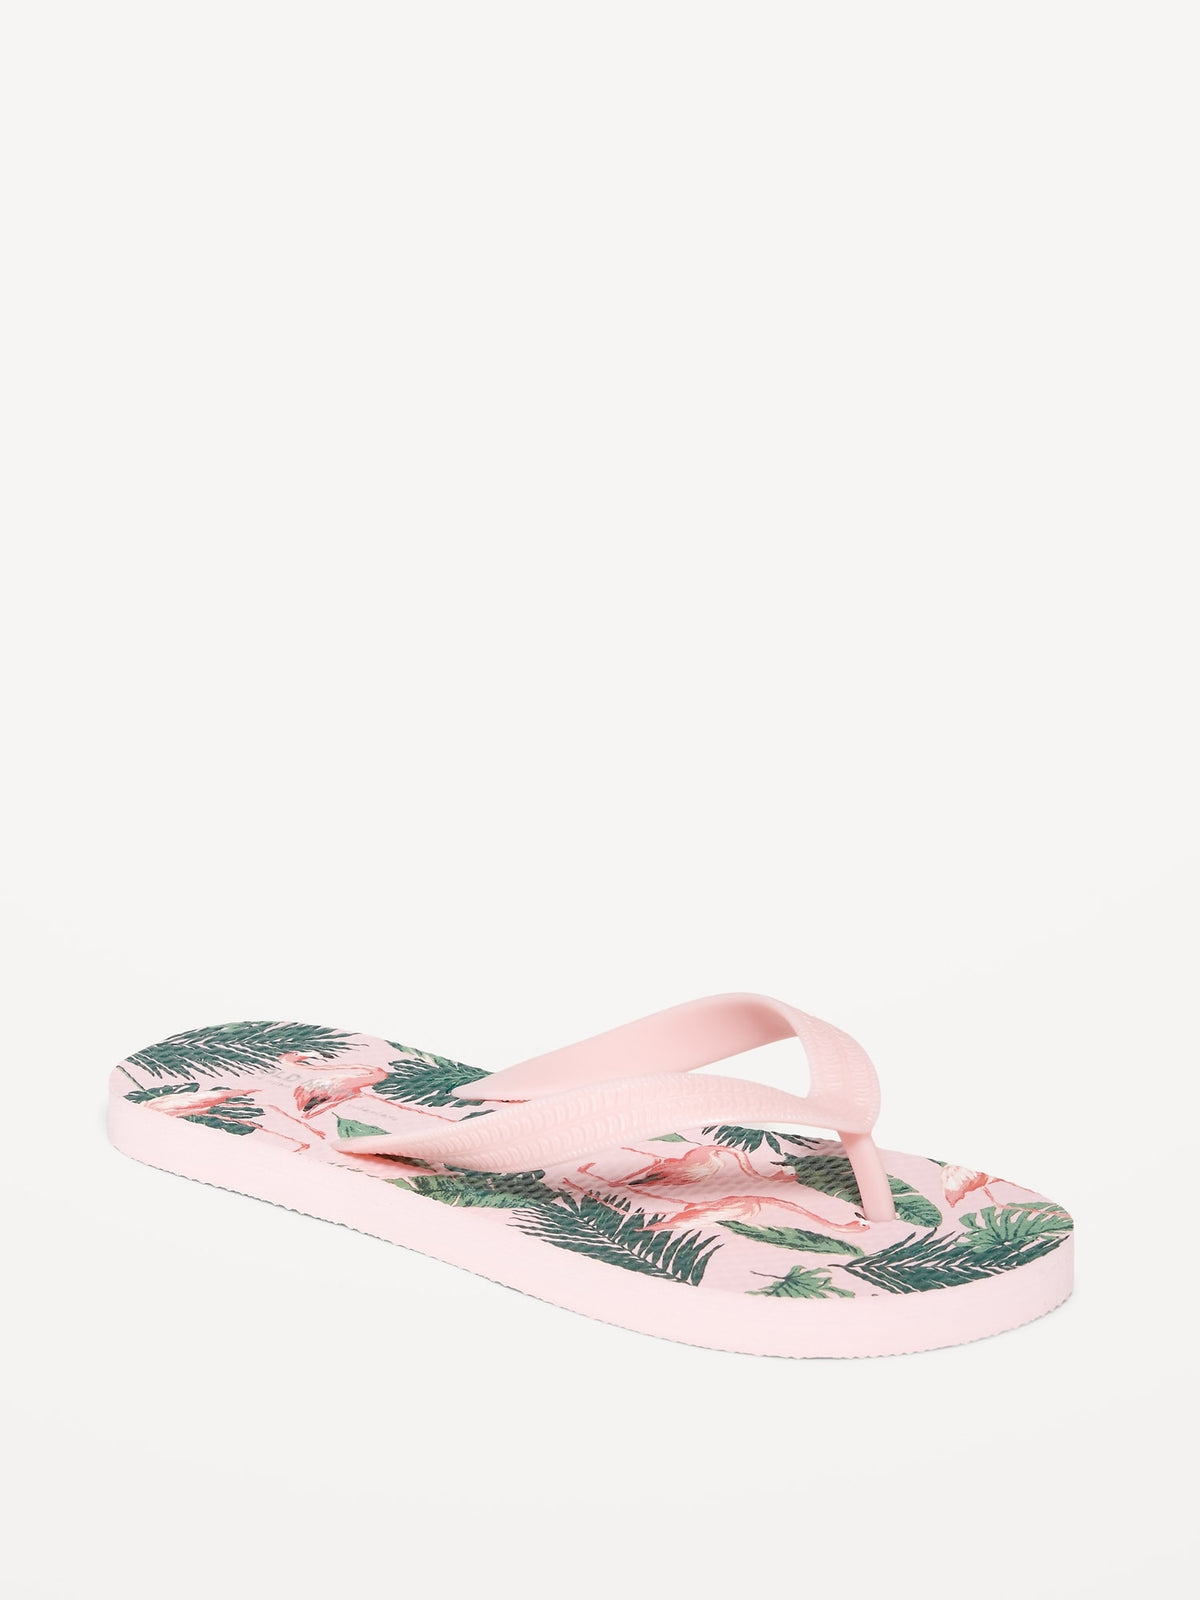 Flip-Flop Sandals for Girls (Partially Plant-Based)